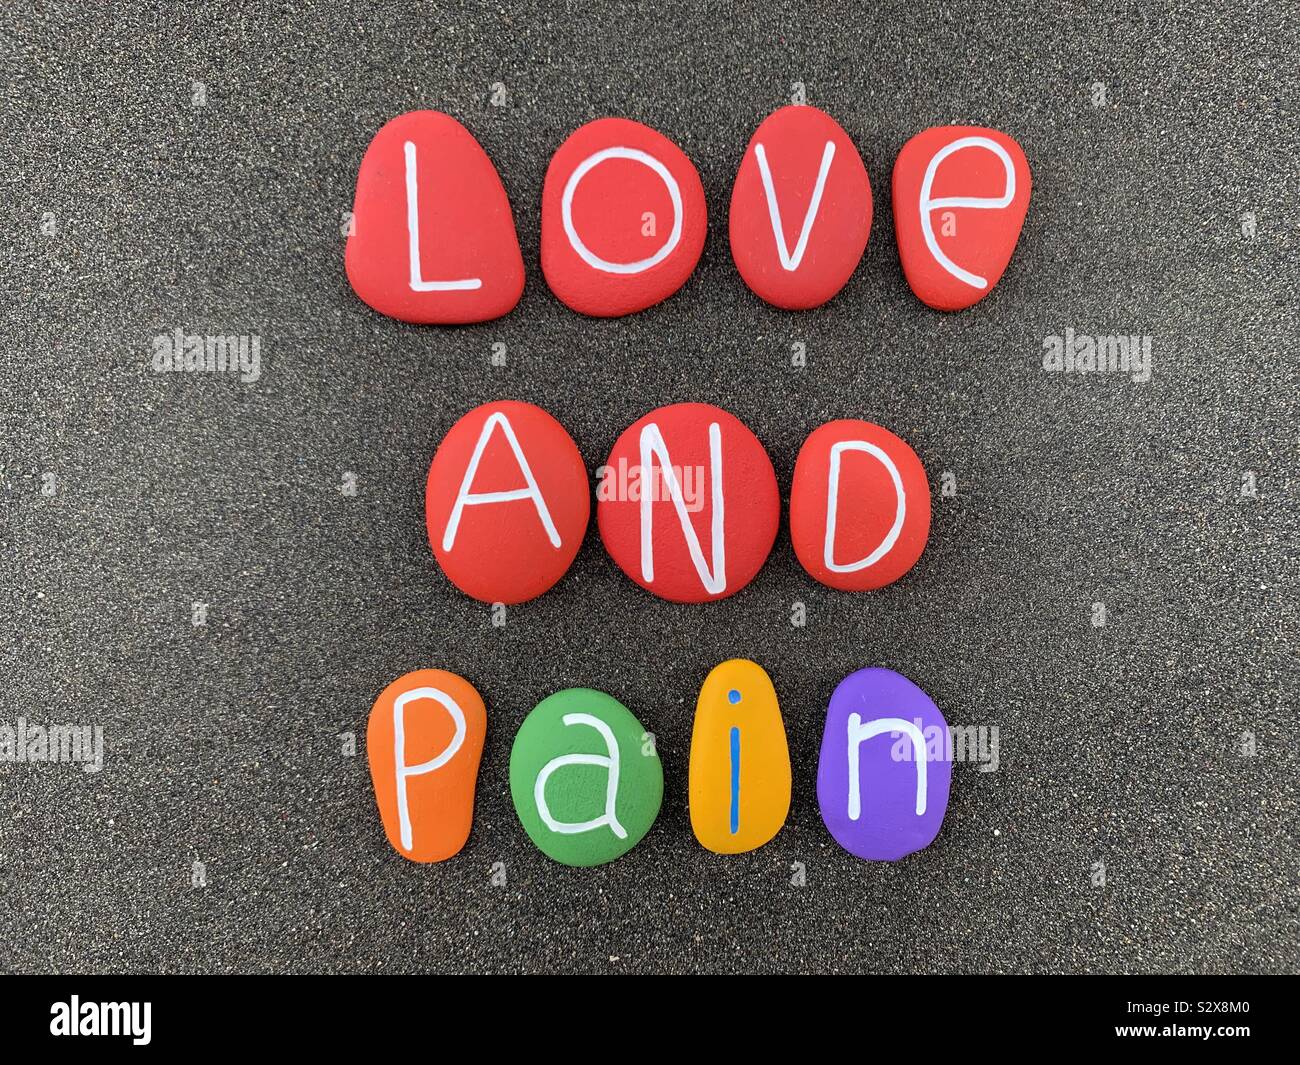 Love and pain Stock Photo